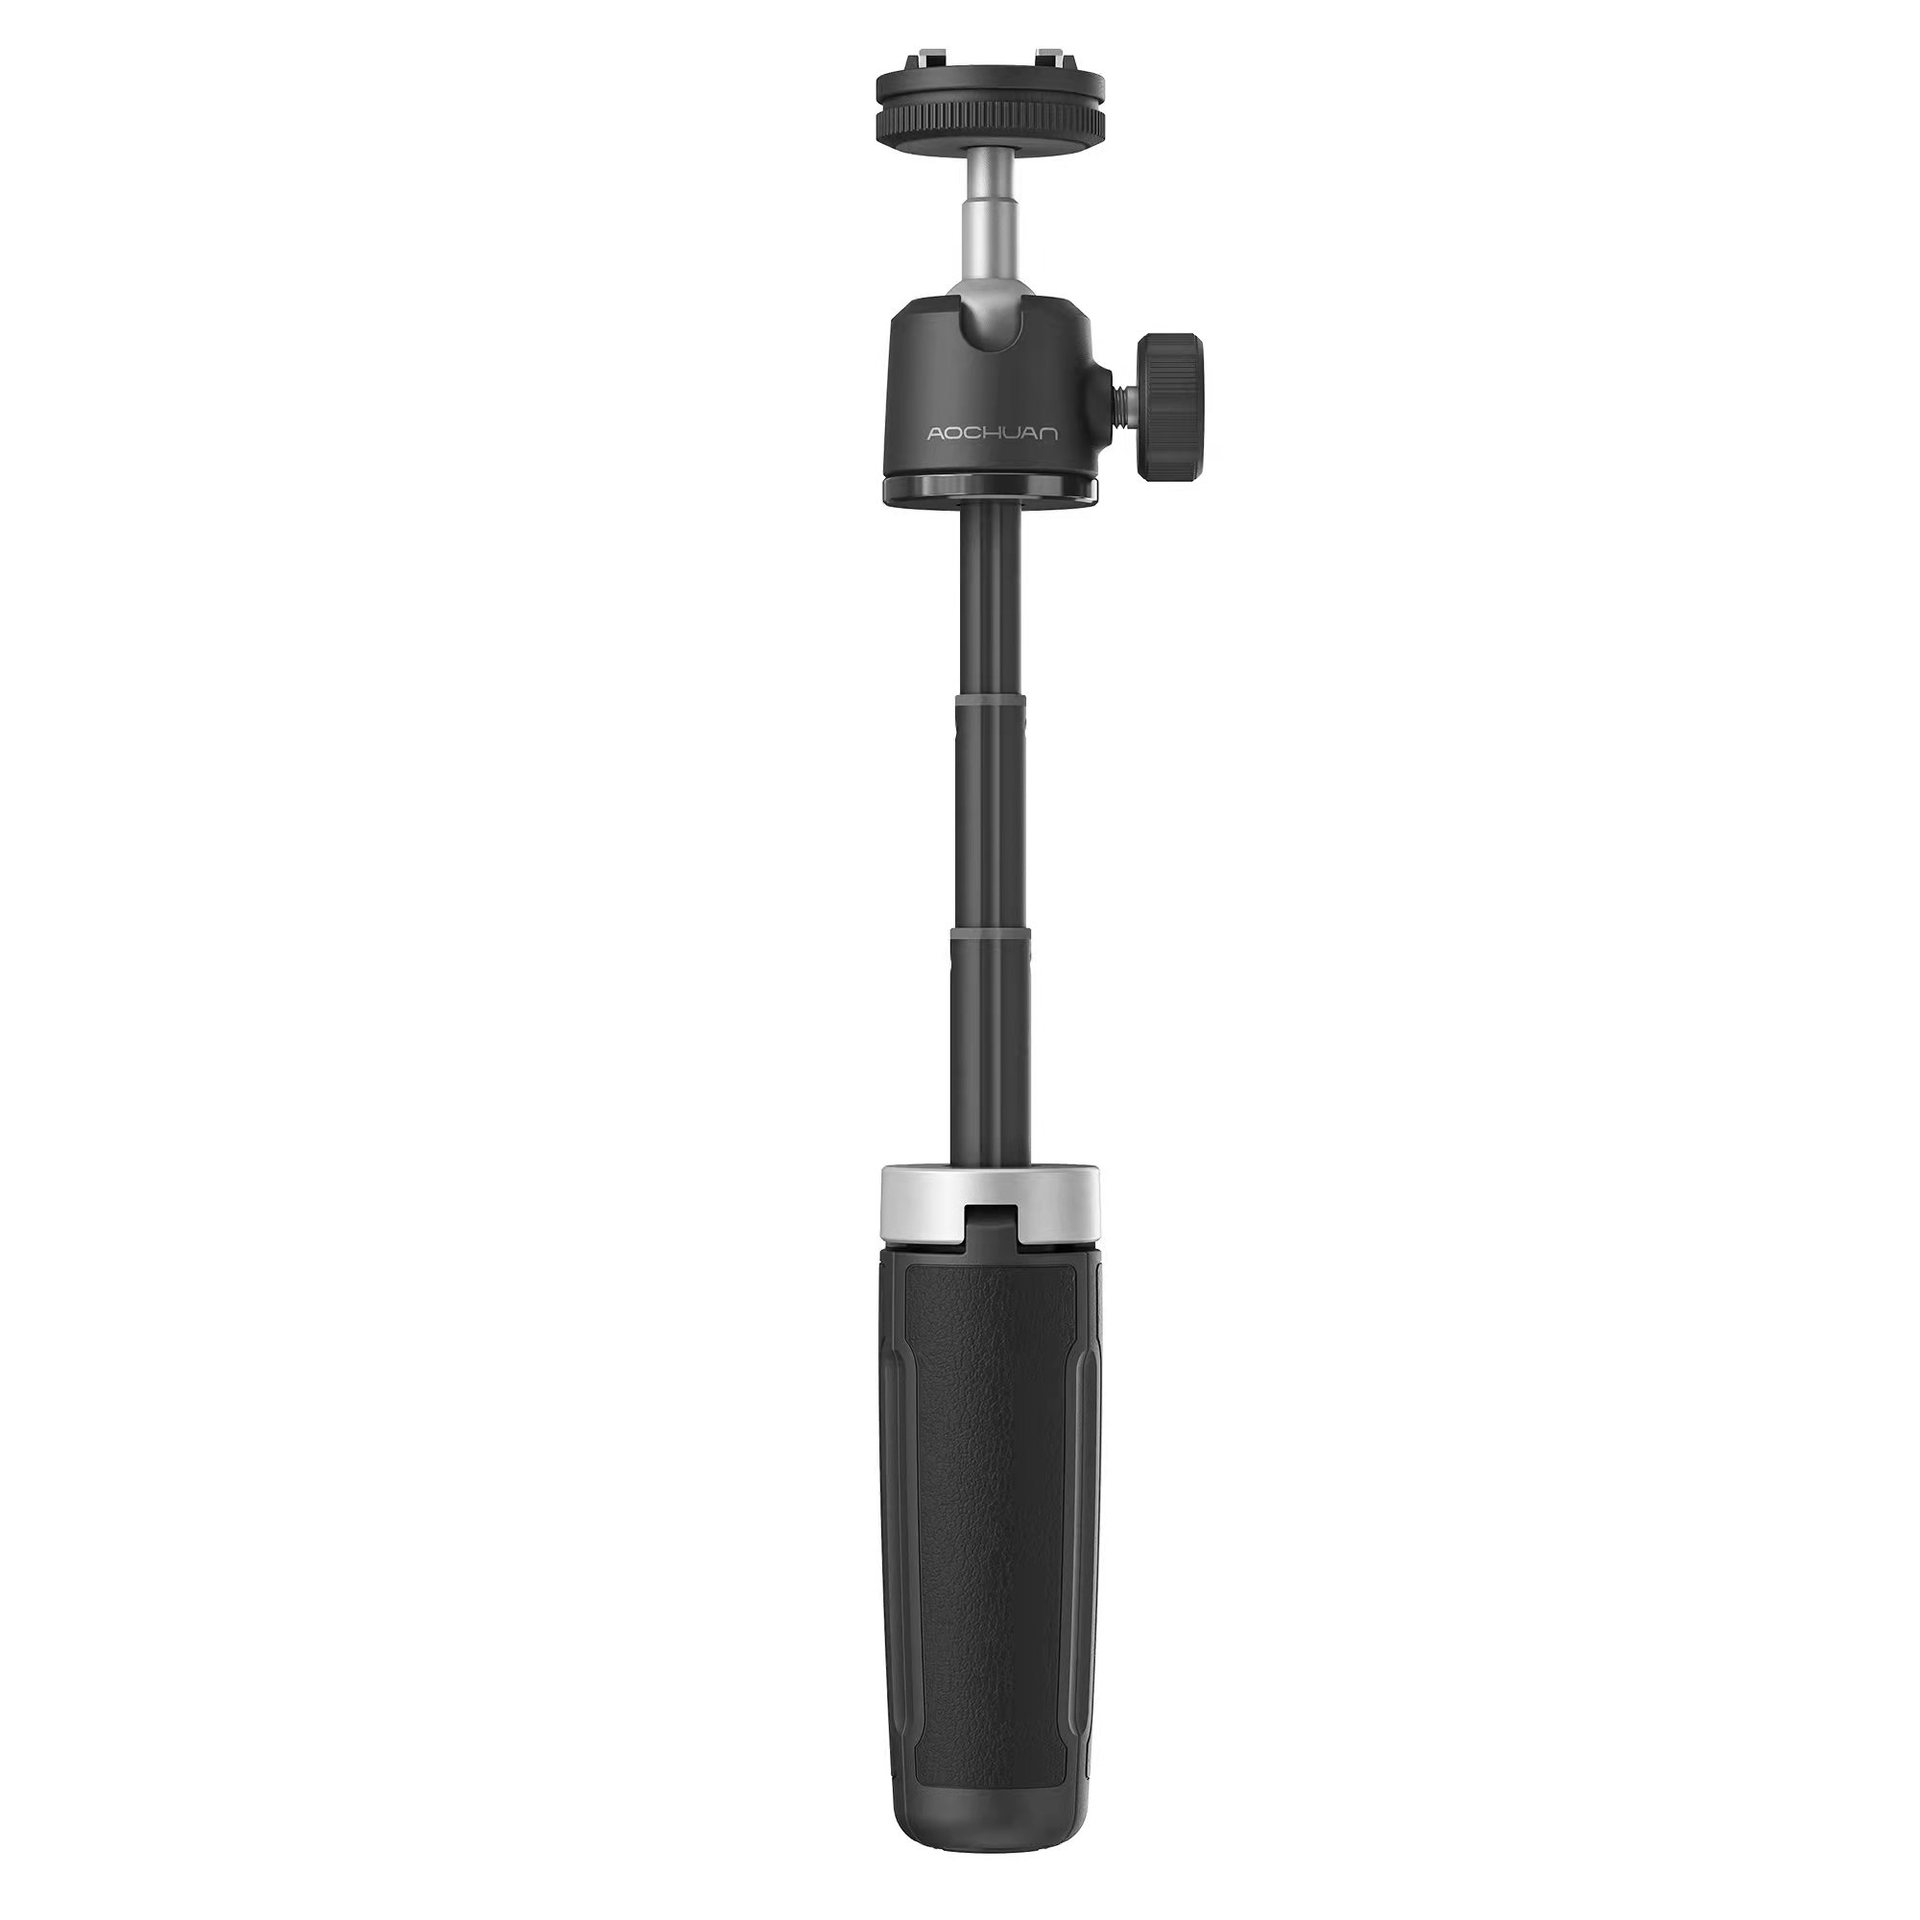 AOCHUAN-T10-Mini-Tripod-with-14-inch-Mount-Cold-Shoe-Hole-for-Camera-Smartphone-Action-Sport-Cam-for-1918214-4